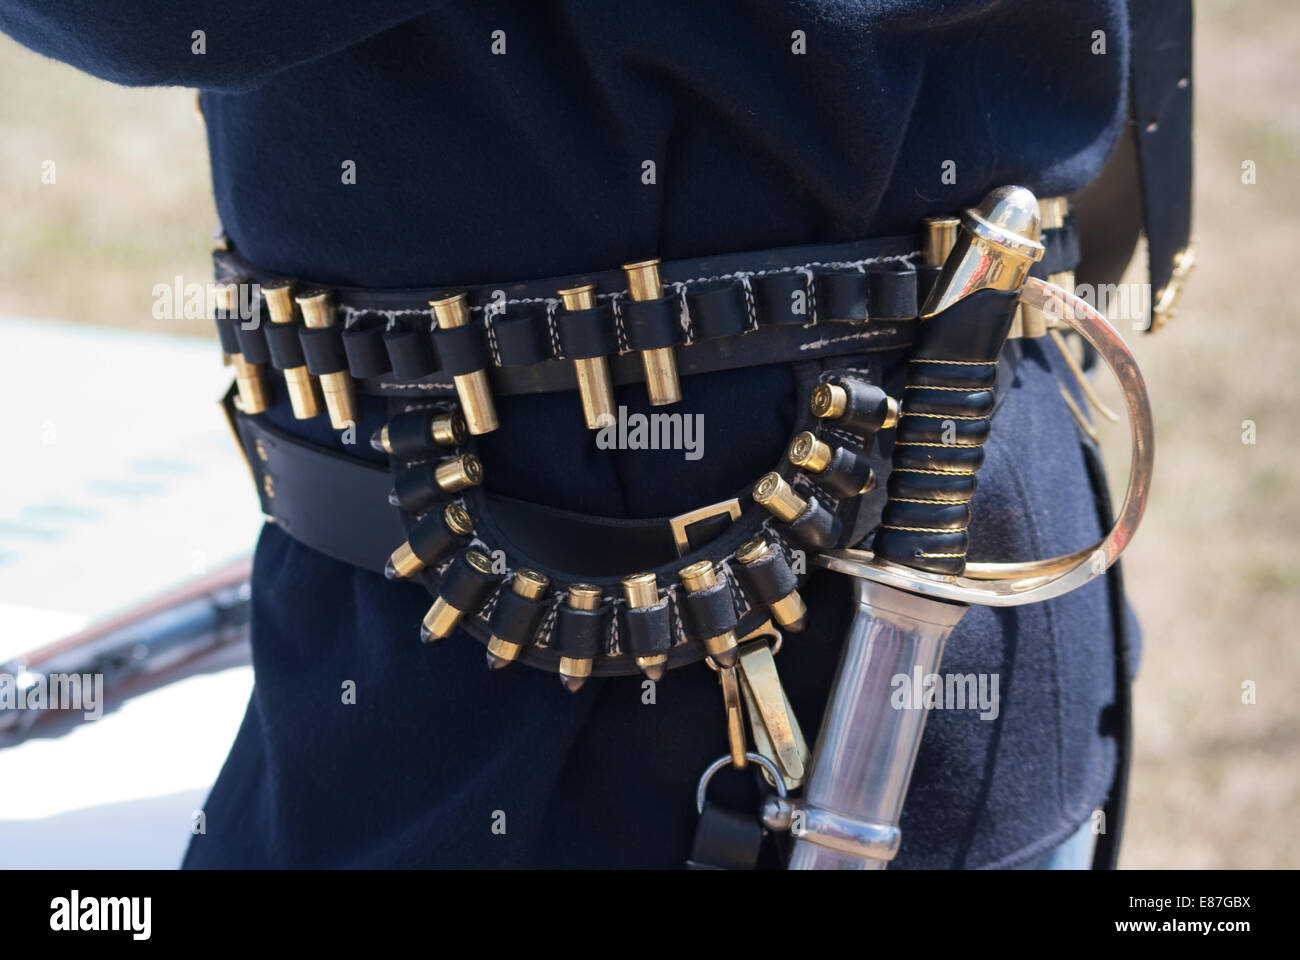 Vintage gun belt and military sword typical of equipment used by the U.S. Cavalry during the Indian Wars. Stock Photo